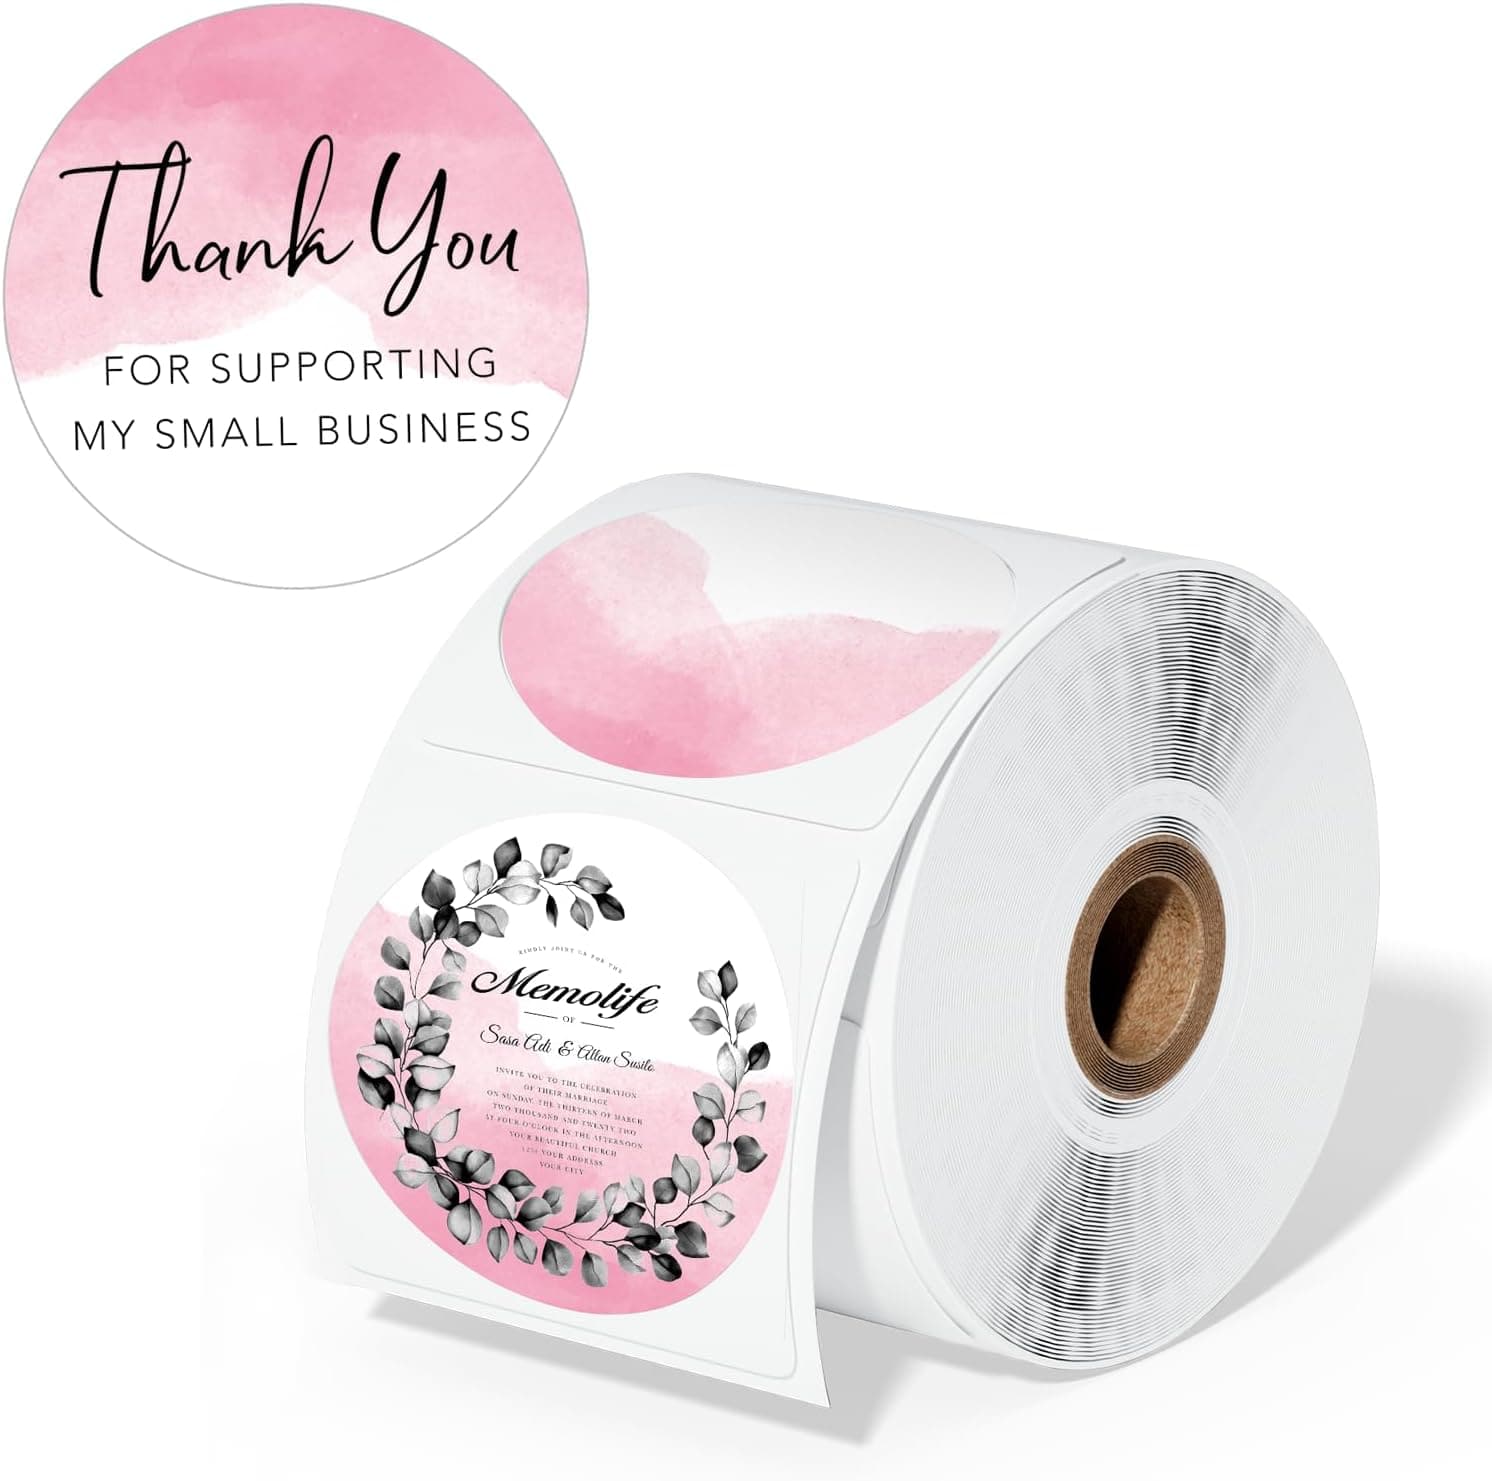 Phomemo 2" Pink Round Thermal Label Sticker for Shipping Label Printer